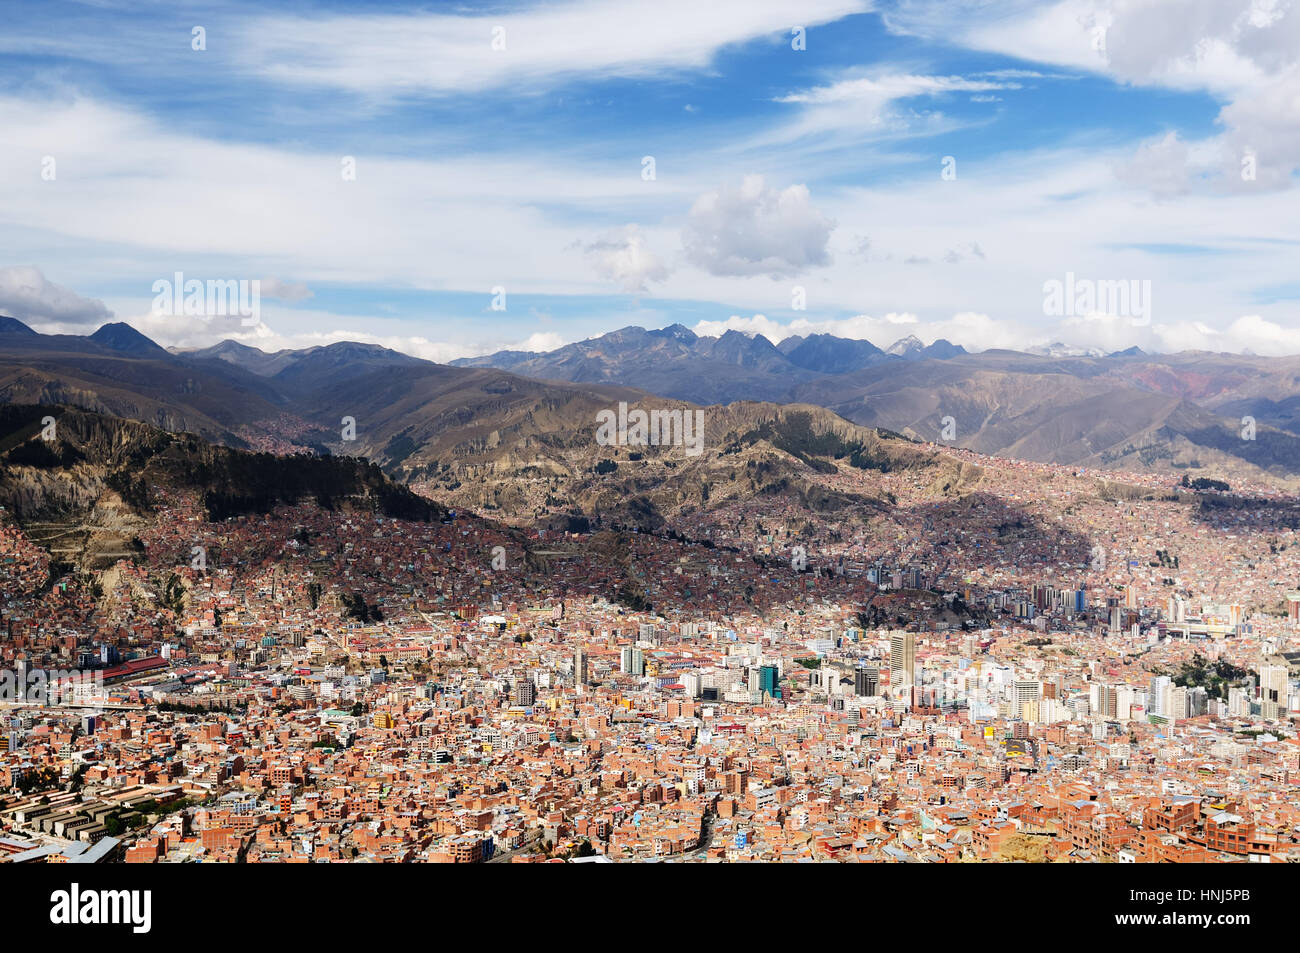 La Paz - the governmental capital of Bolivia. The city's building cling to the sides of the canyon and spill spectaculary downwards. The picture prese Stock Photo